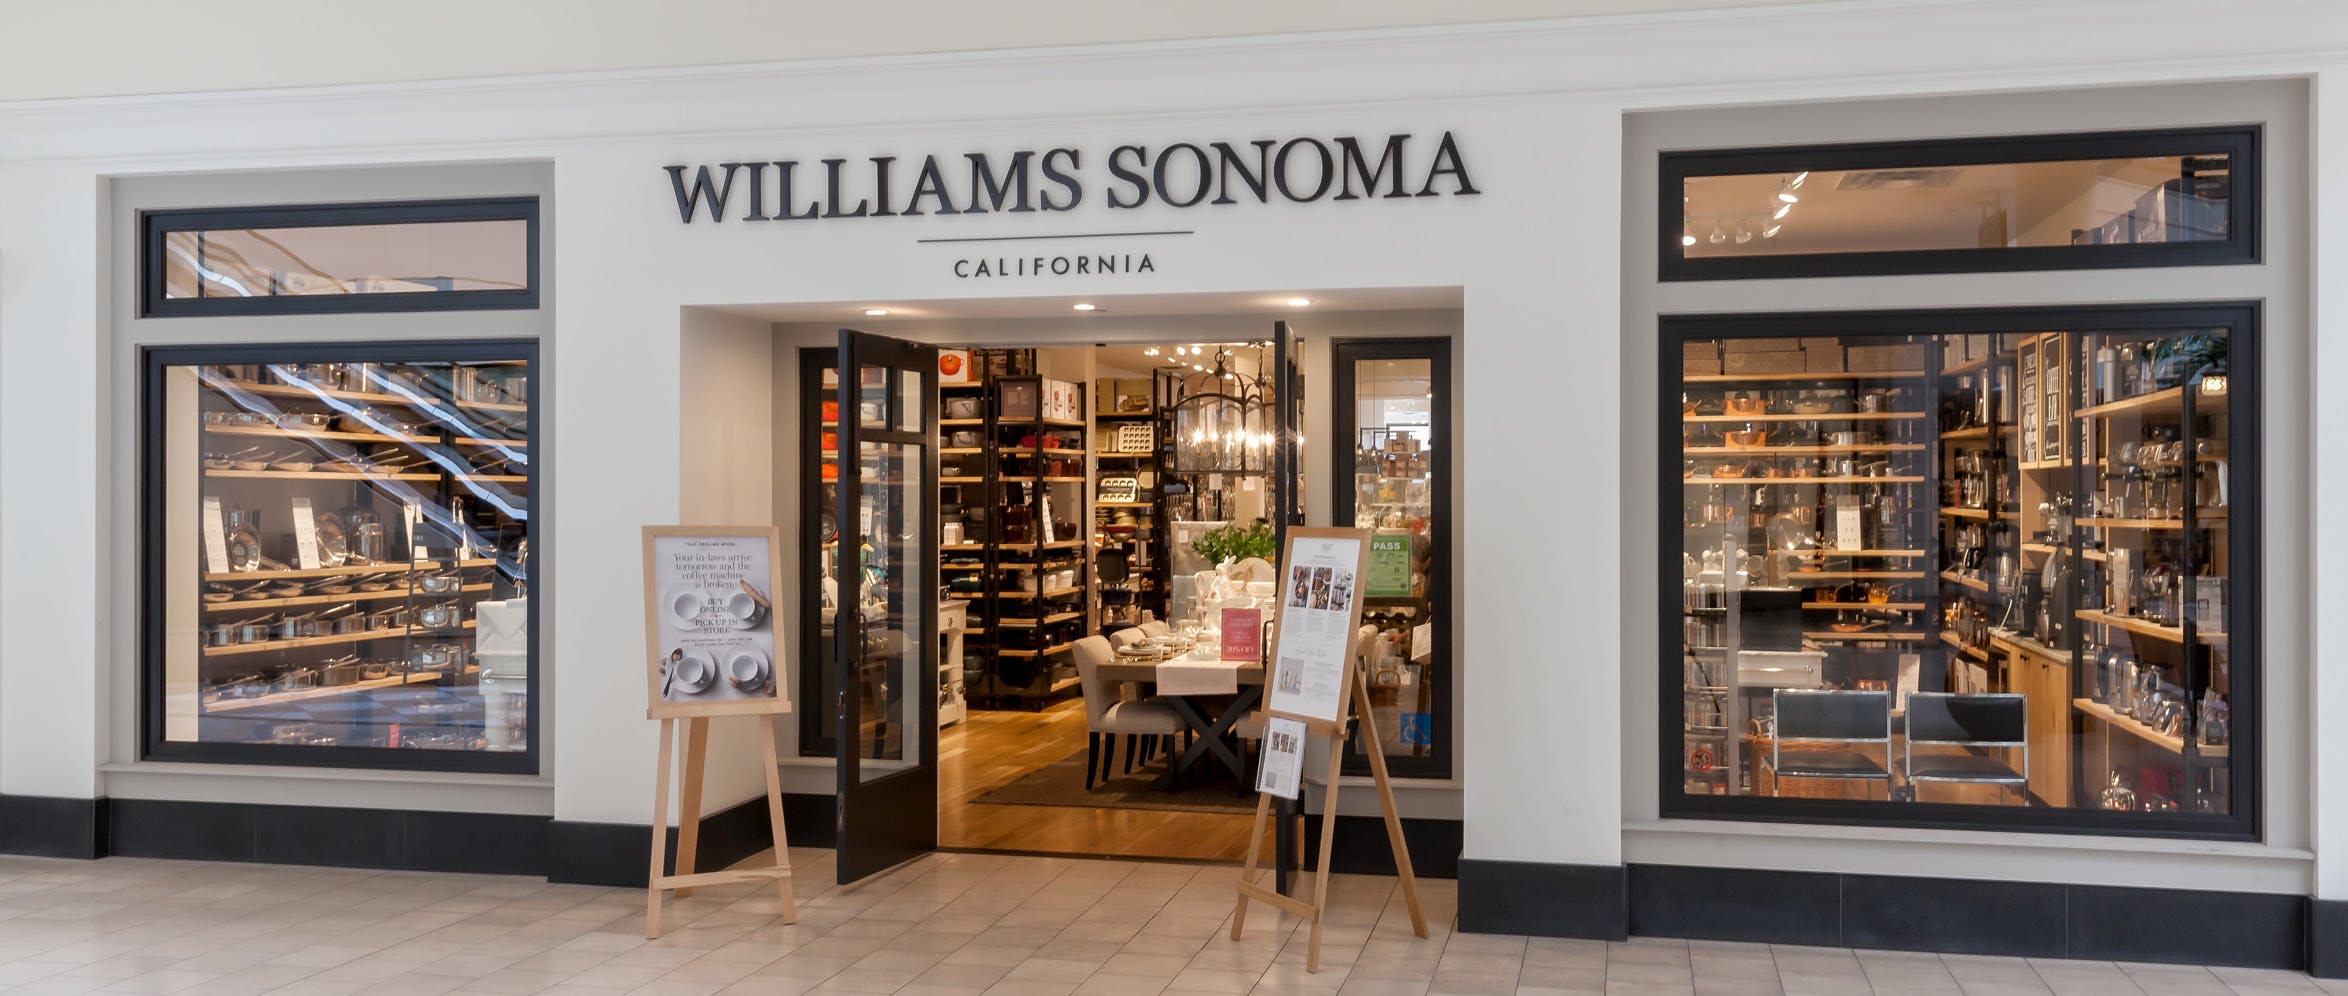 Shopping at Williams-Sonoma in the Historic Town of Sonoma